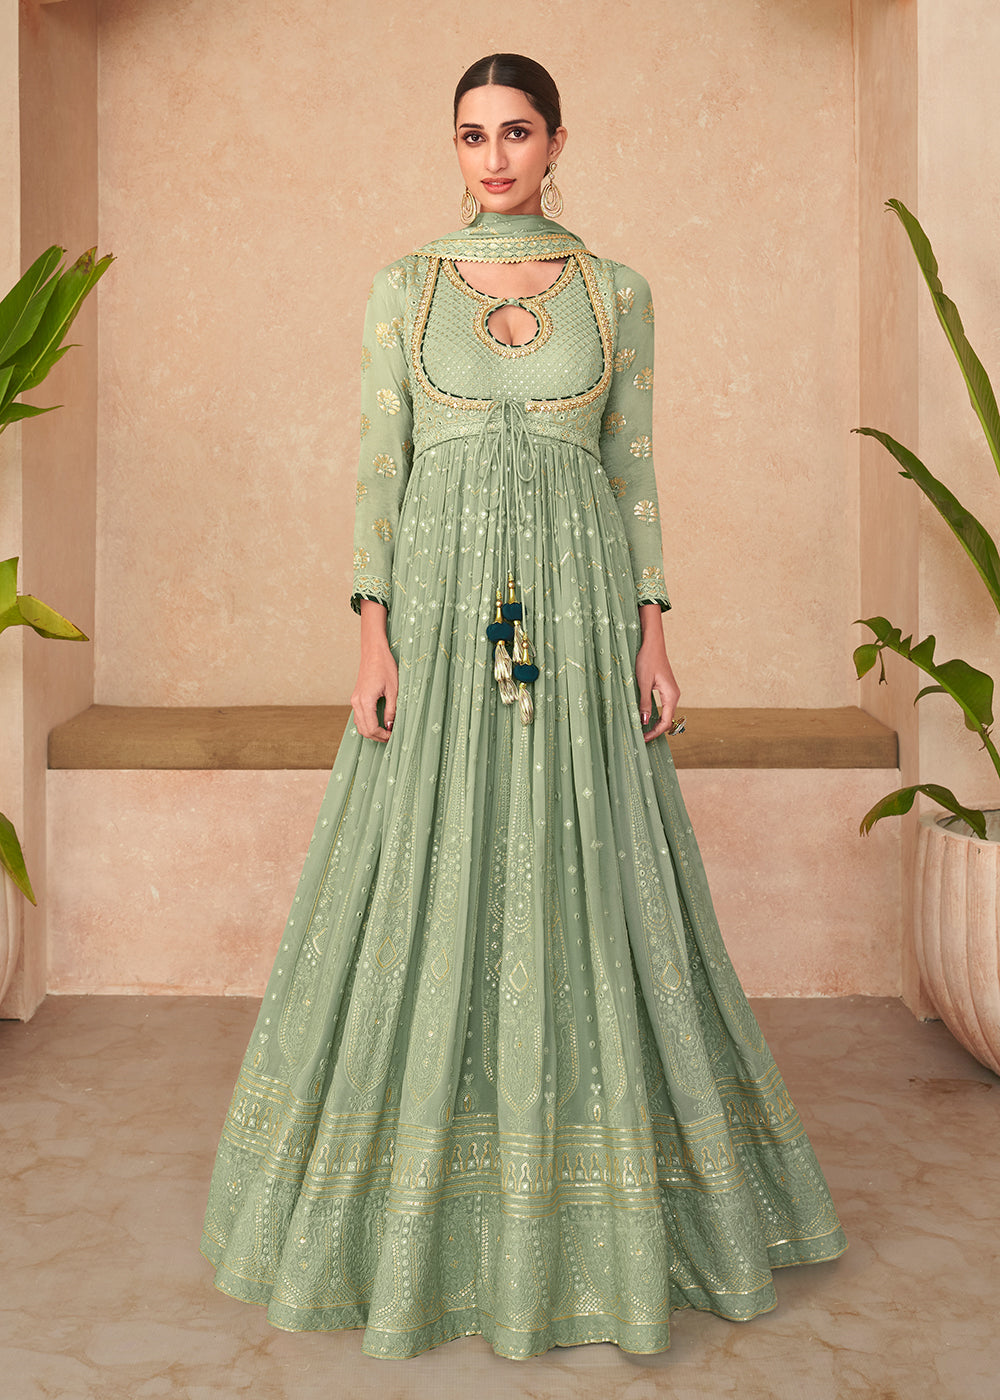 Buy Now Superb Green Embroidered Real Georgette Wedding Anarkali Suit Online in USA, UK, Australia, New Zealand, Canada & Worldwide at Empress Clothing.